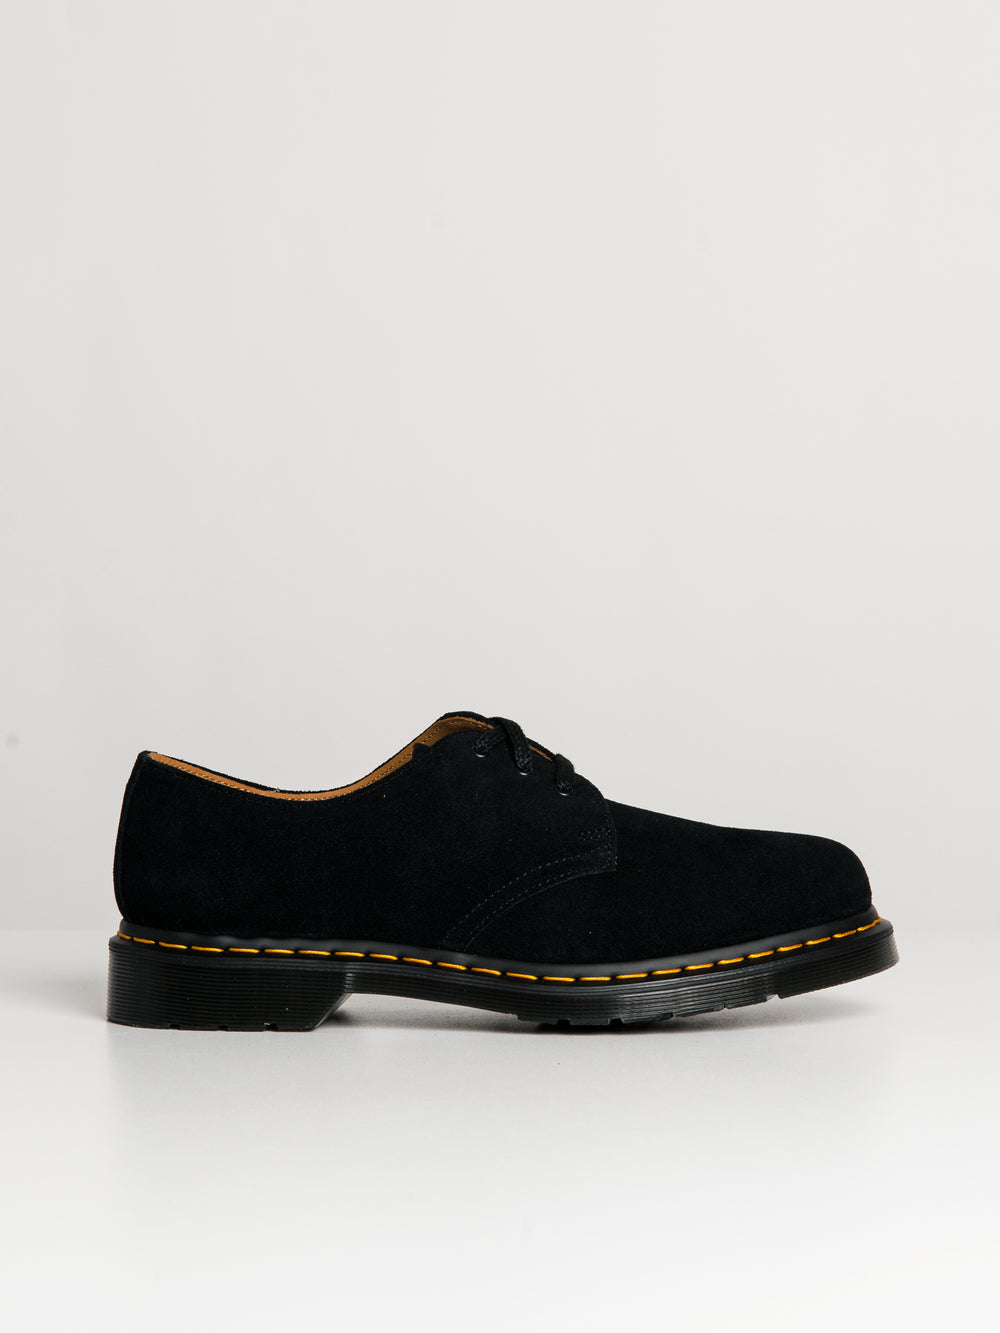 DR MARTENS 1461 SUEDE OXFORD SHOES - CLEARANCE